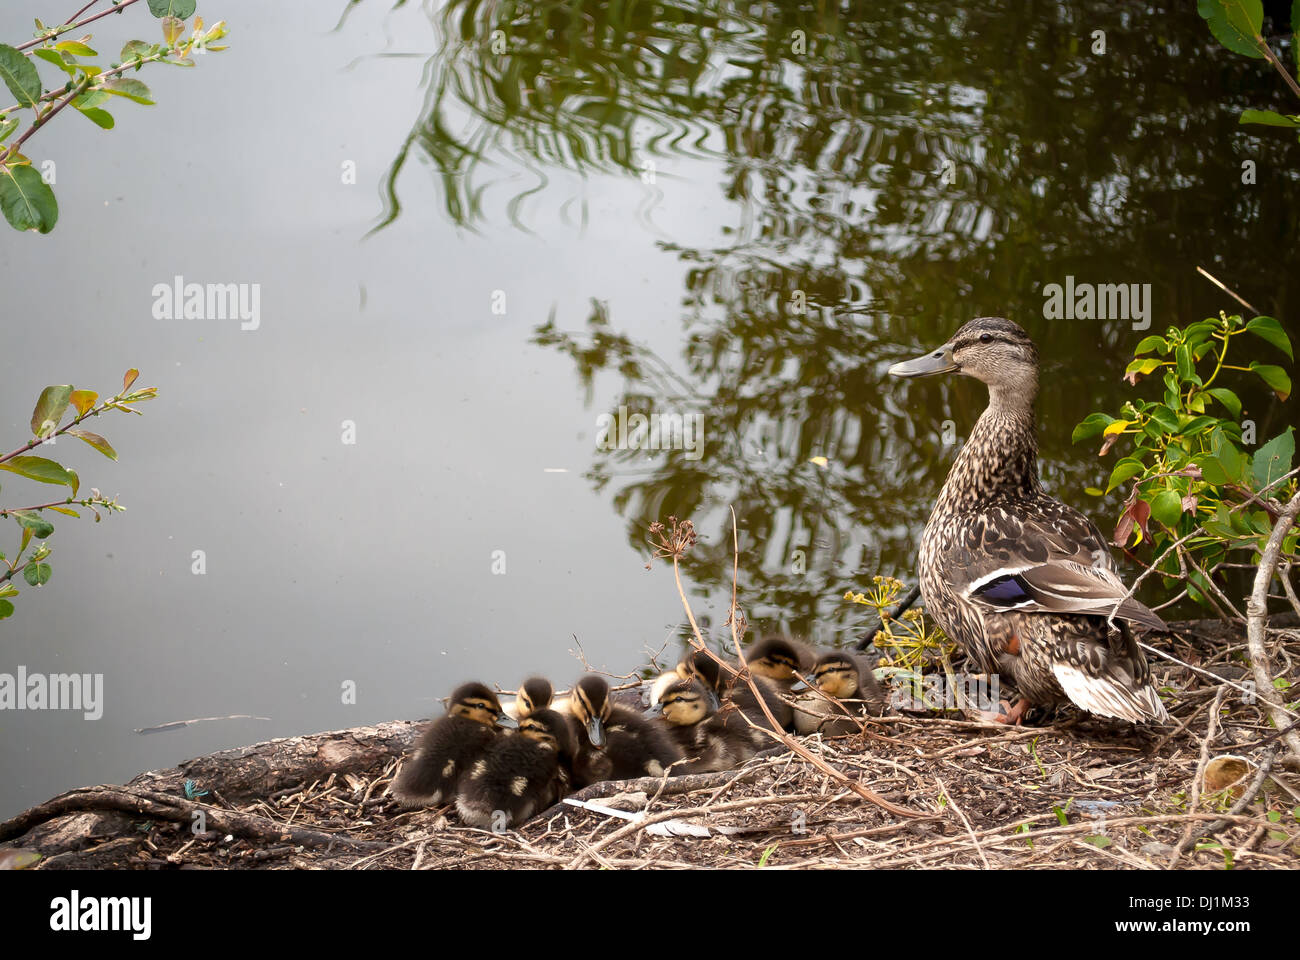 An image of a Mallard Duck with her very young brood of chicks. Taken at Swanpool Nature Reserve, Falmouth, Cornwall,UK. Stock Photo